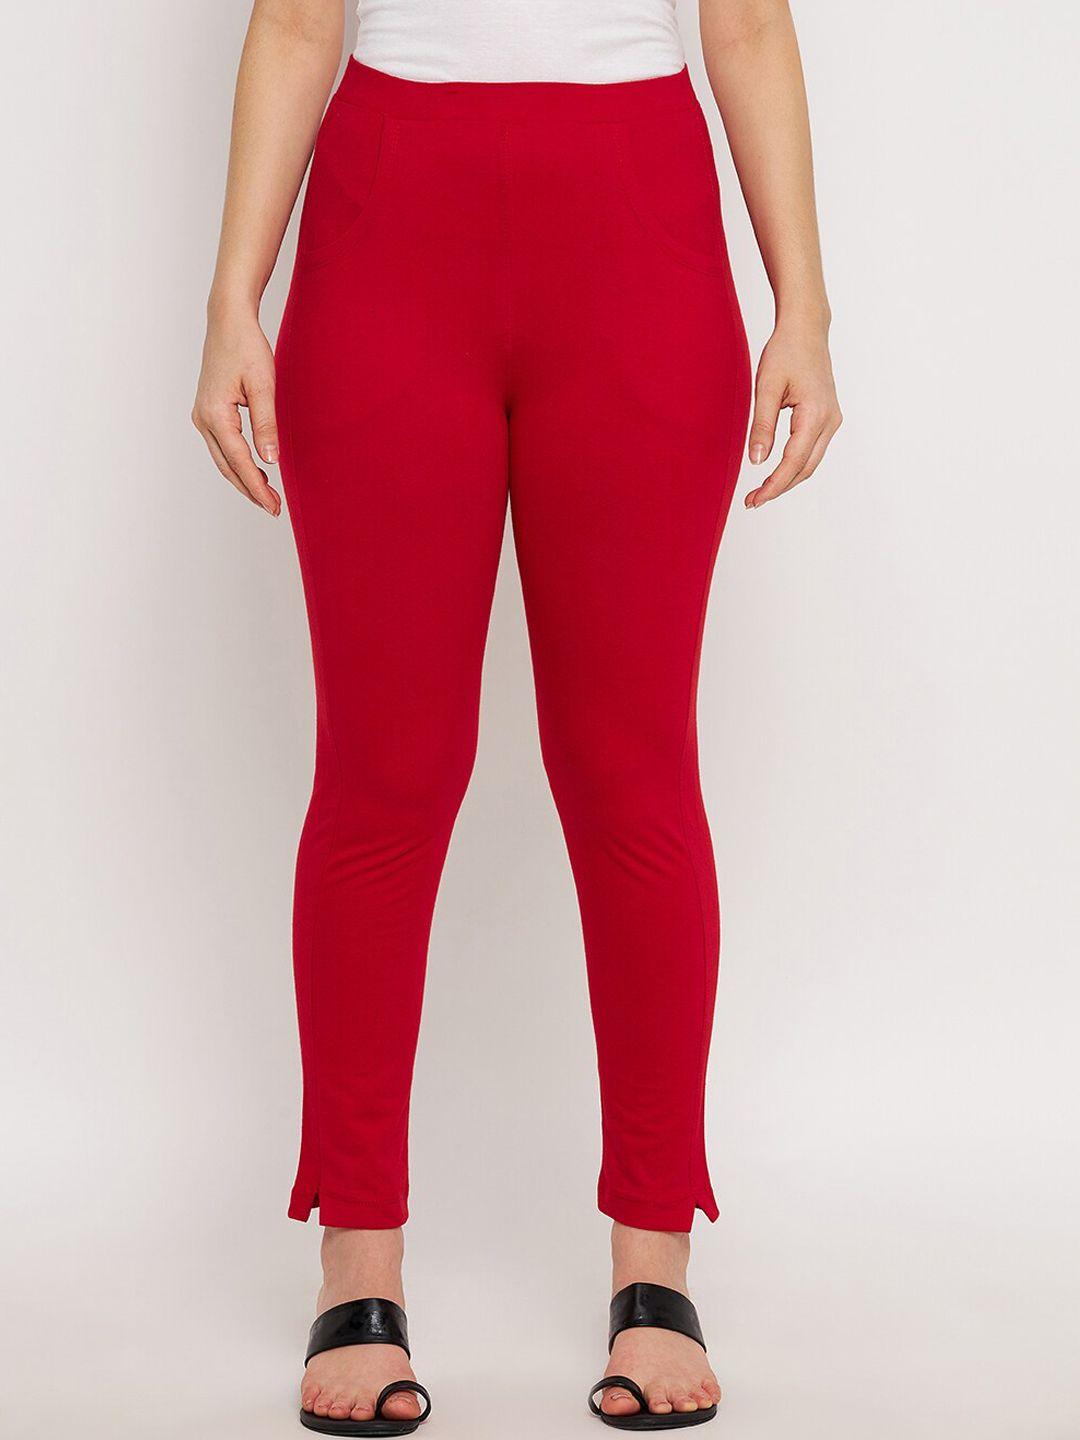 clora creation women red solid cotton ankle length leggings